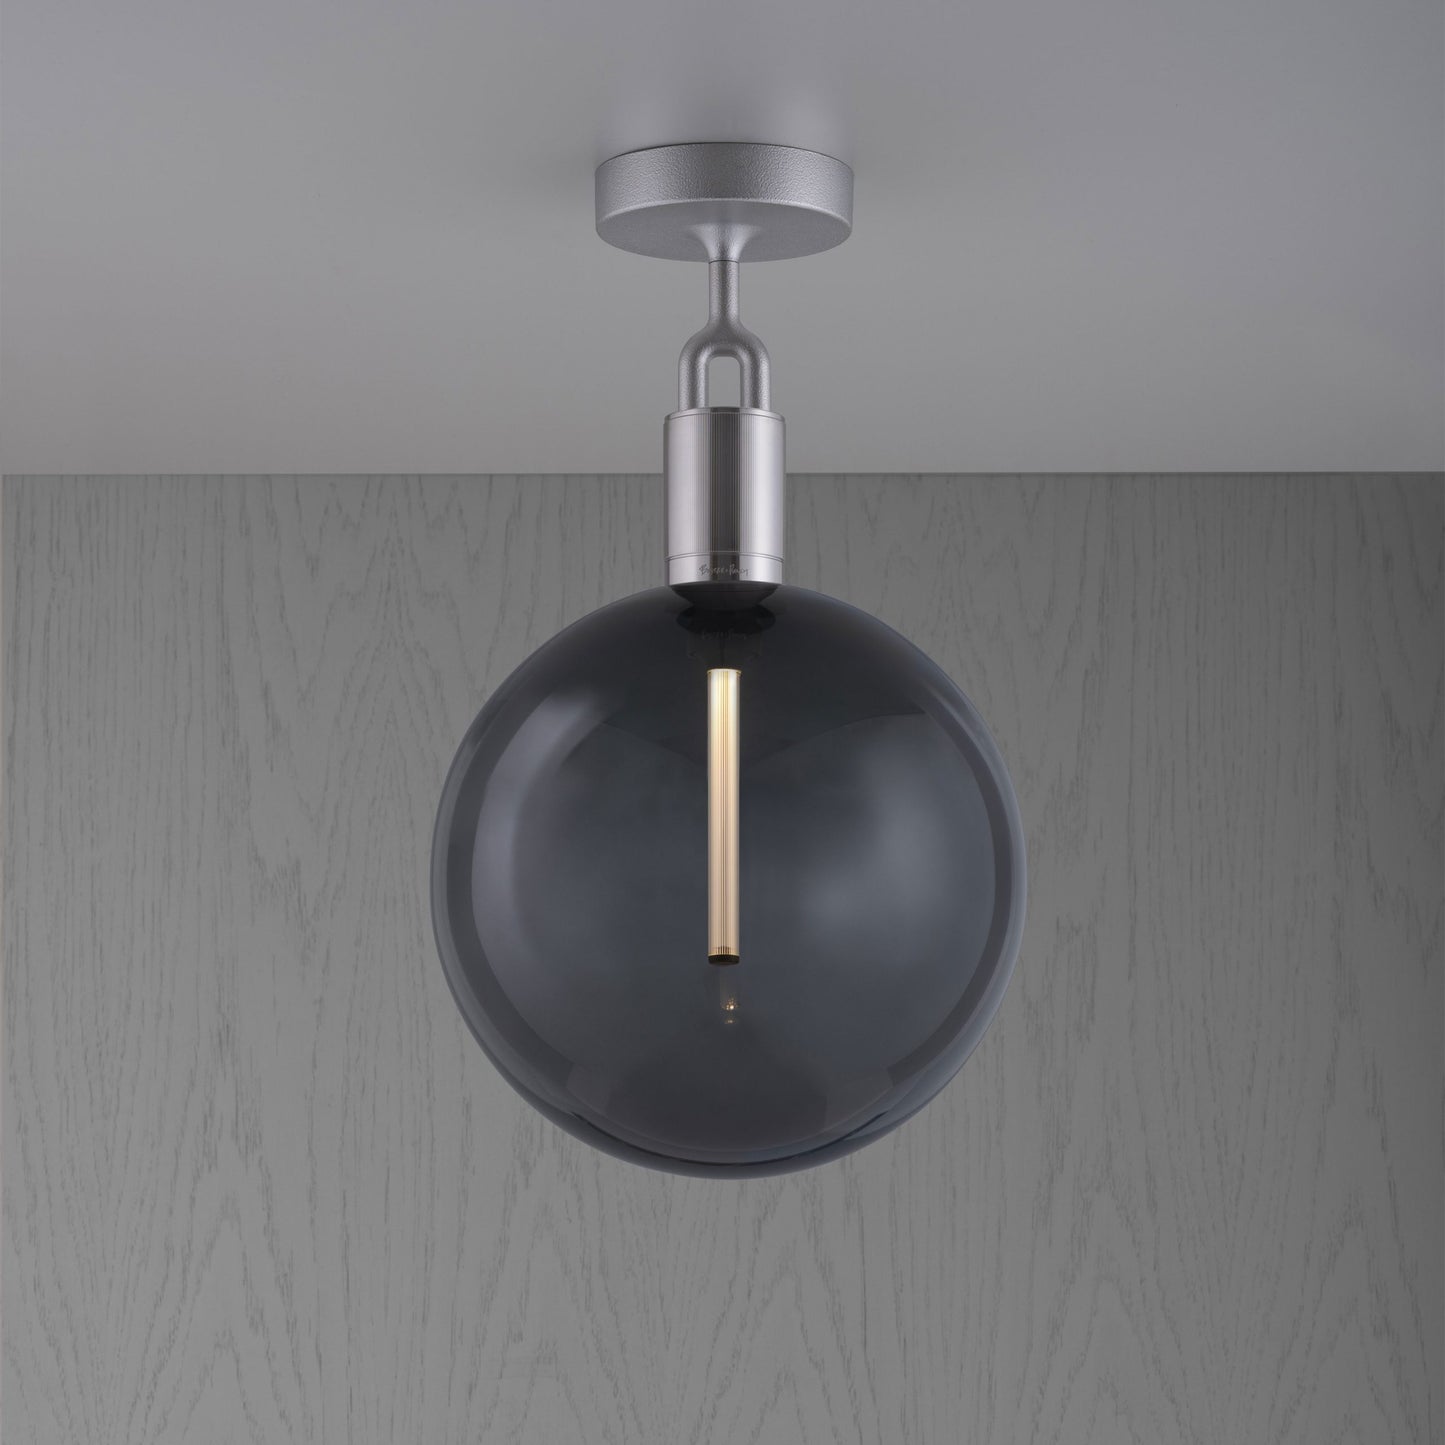 Forked Ceiling Light / Globe / Smoked / Large Steel, front view.